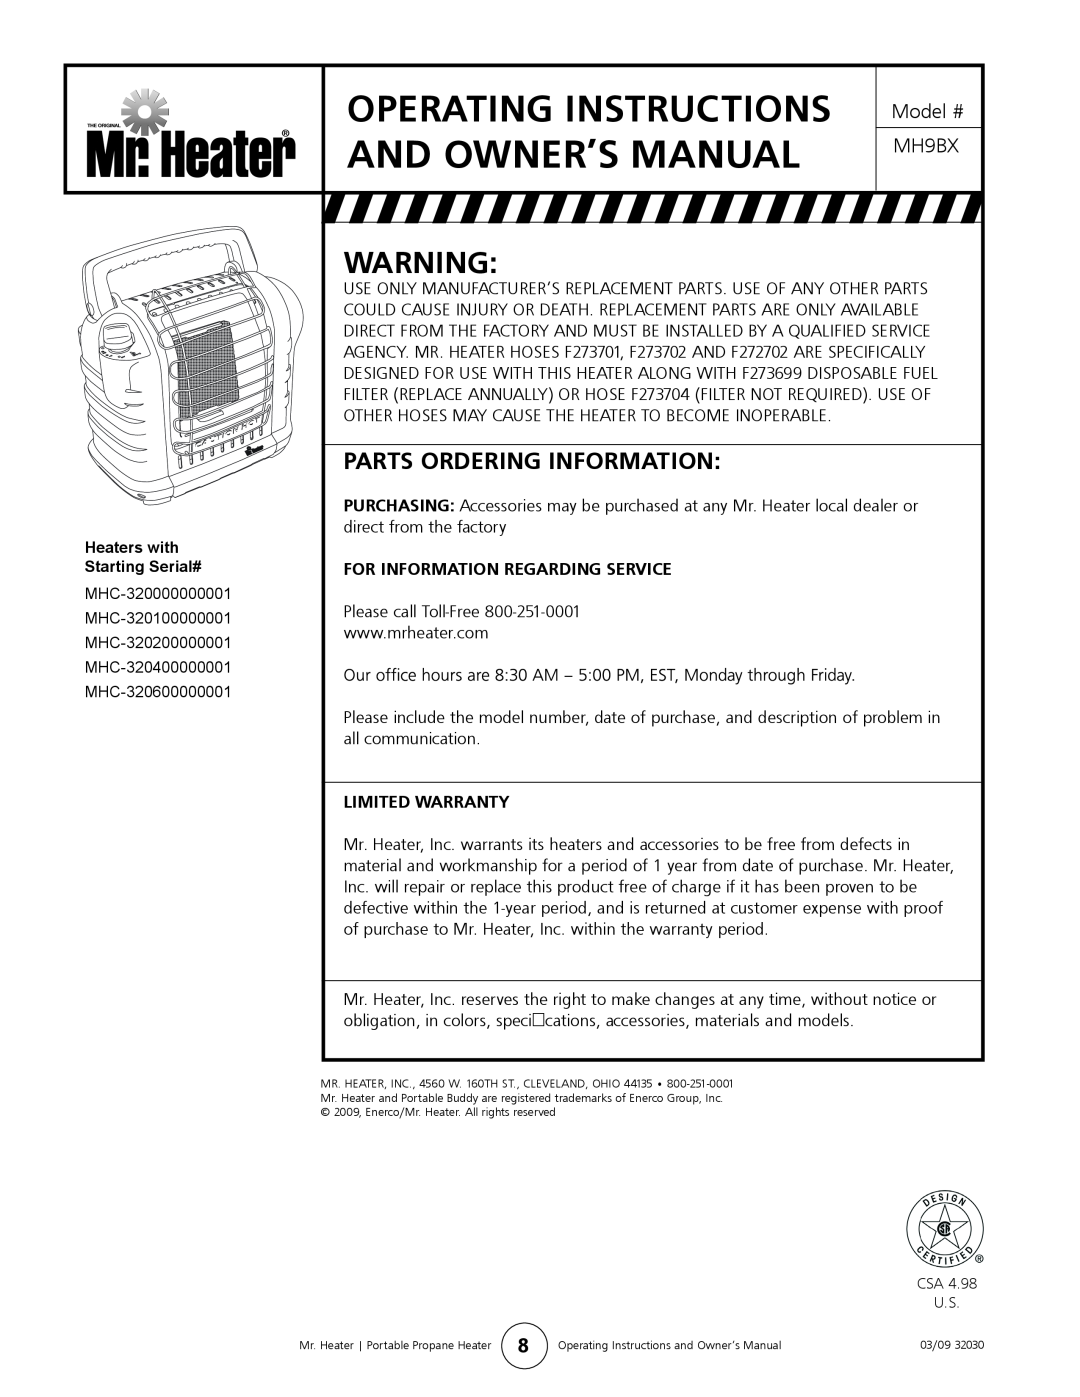 Mr. Heater MH9BX owner manual OPERATING INSTRUCTIONS Model #, Parts Ordering Information, Heaters with, Starting Serial# 